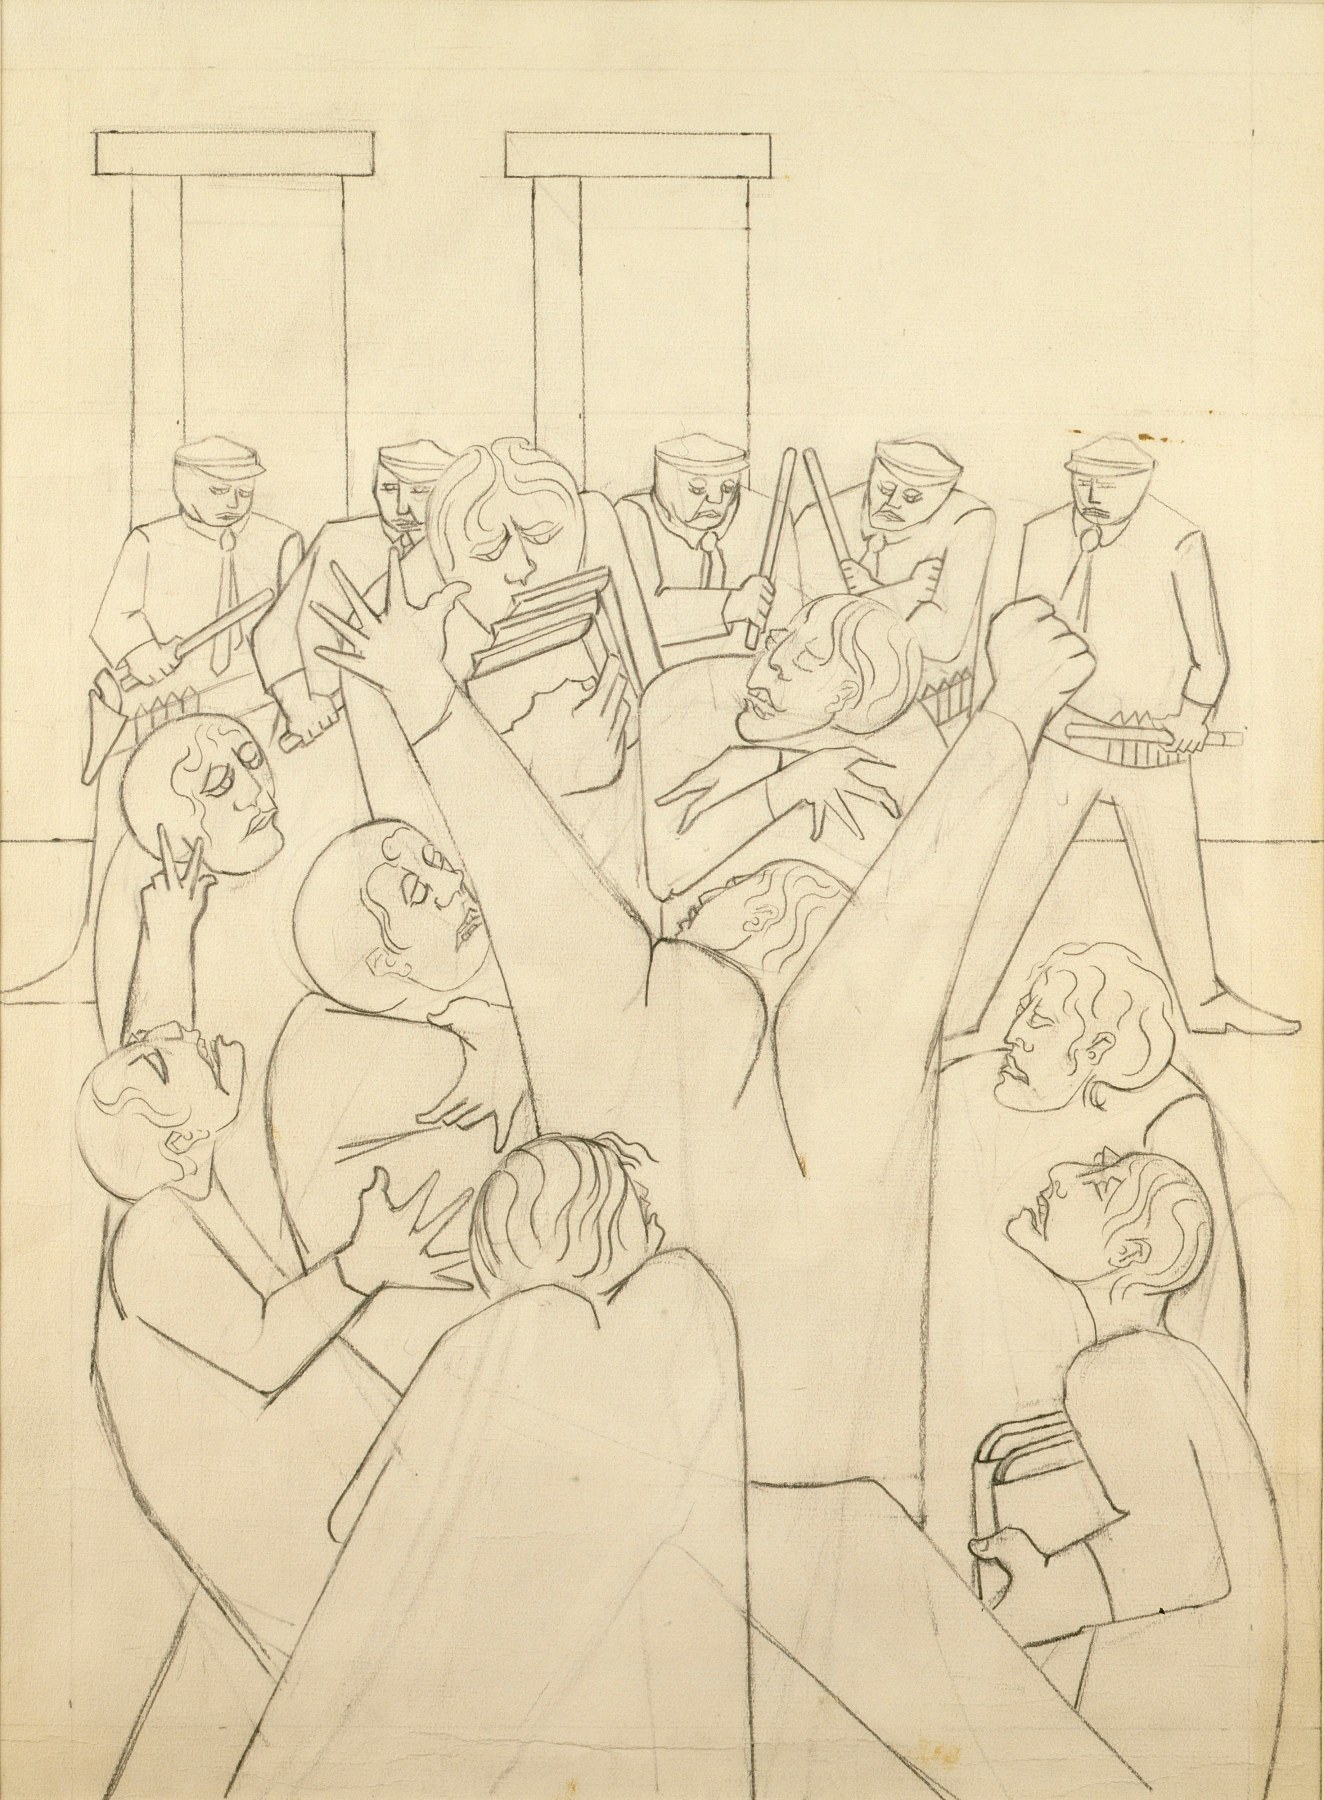 Jacob Lawrence, Struggle (Drawing for), 1965. Graphite on paper, 21 1/2 x 15 7/8 inches